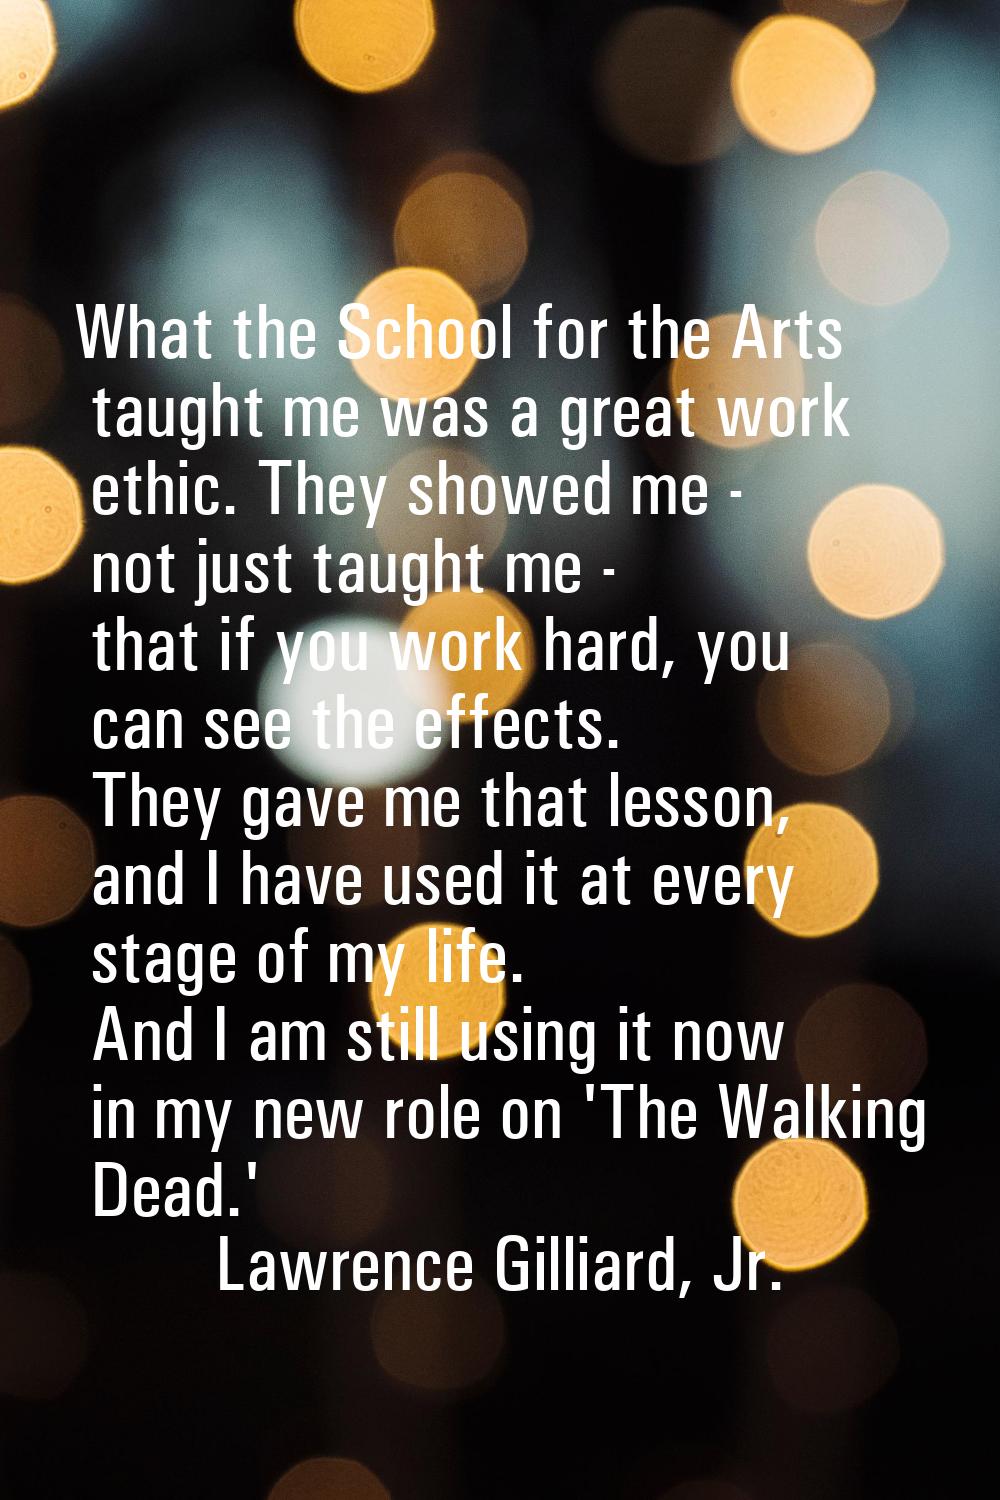 What the School for the Arts taught me was a great work ethic. They showed me - not just taught me 